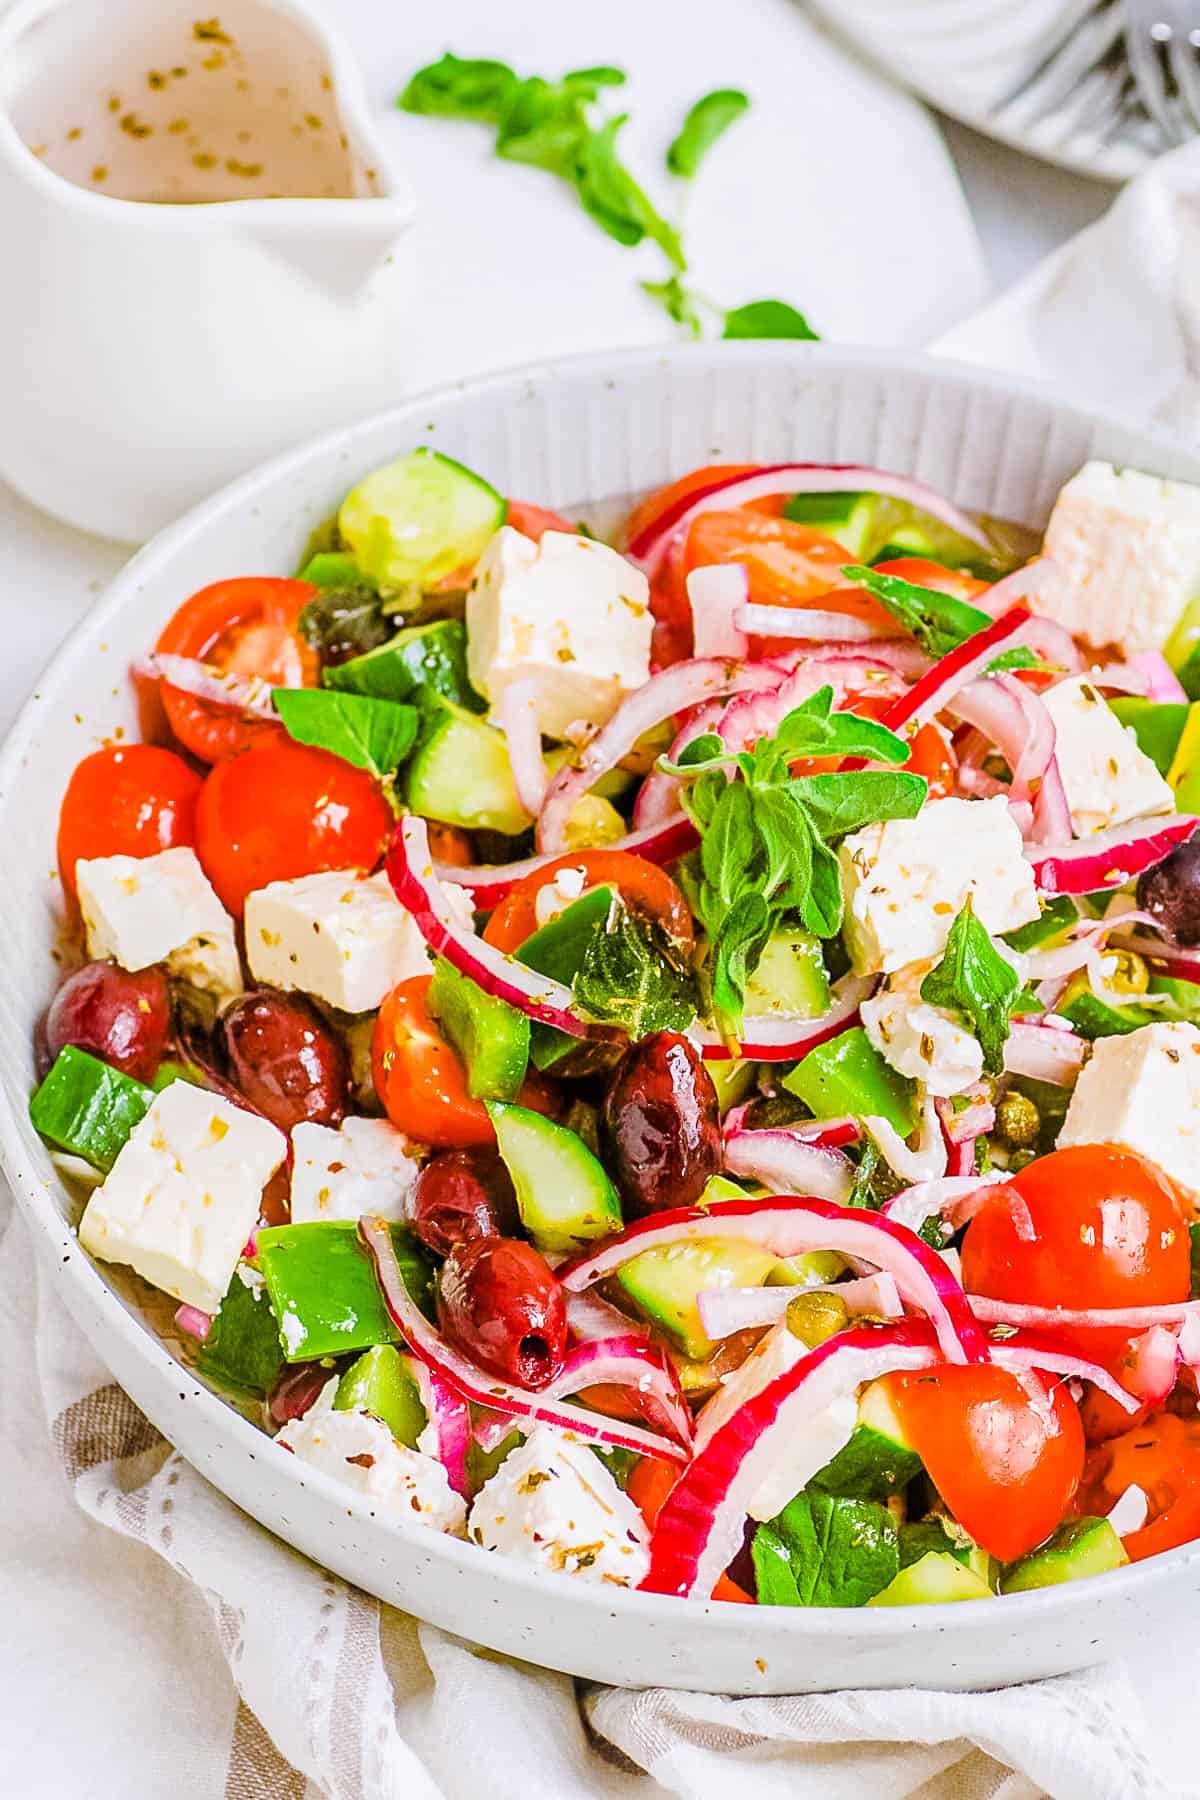 Low carb keto Greek salad with feta served in a white bowl.